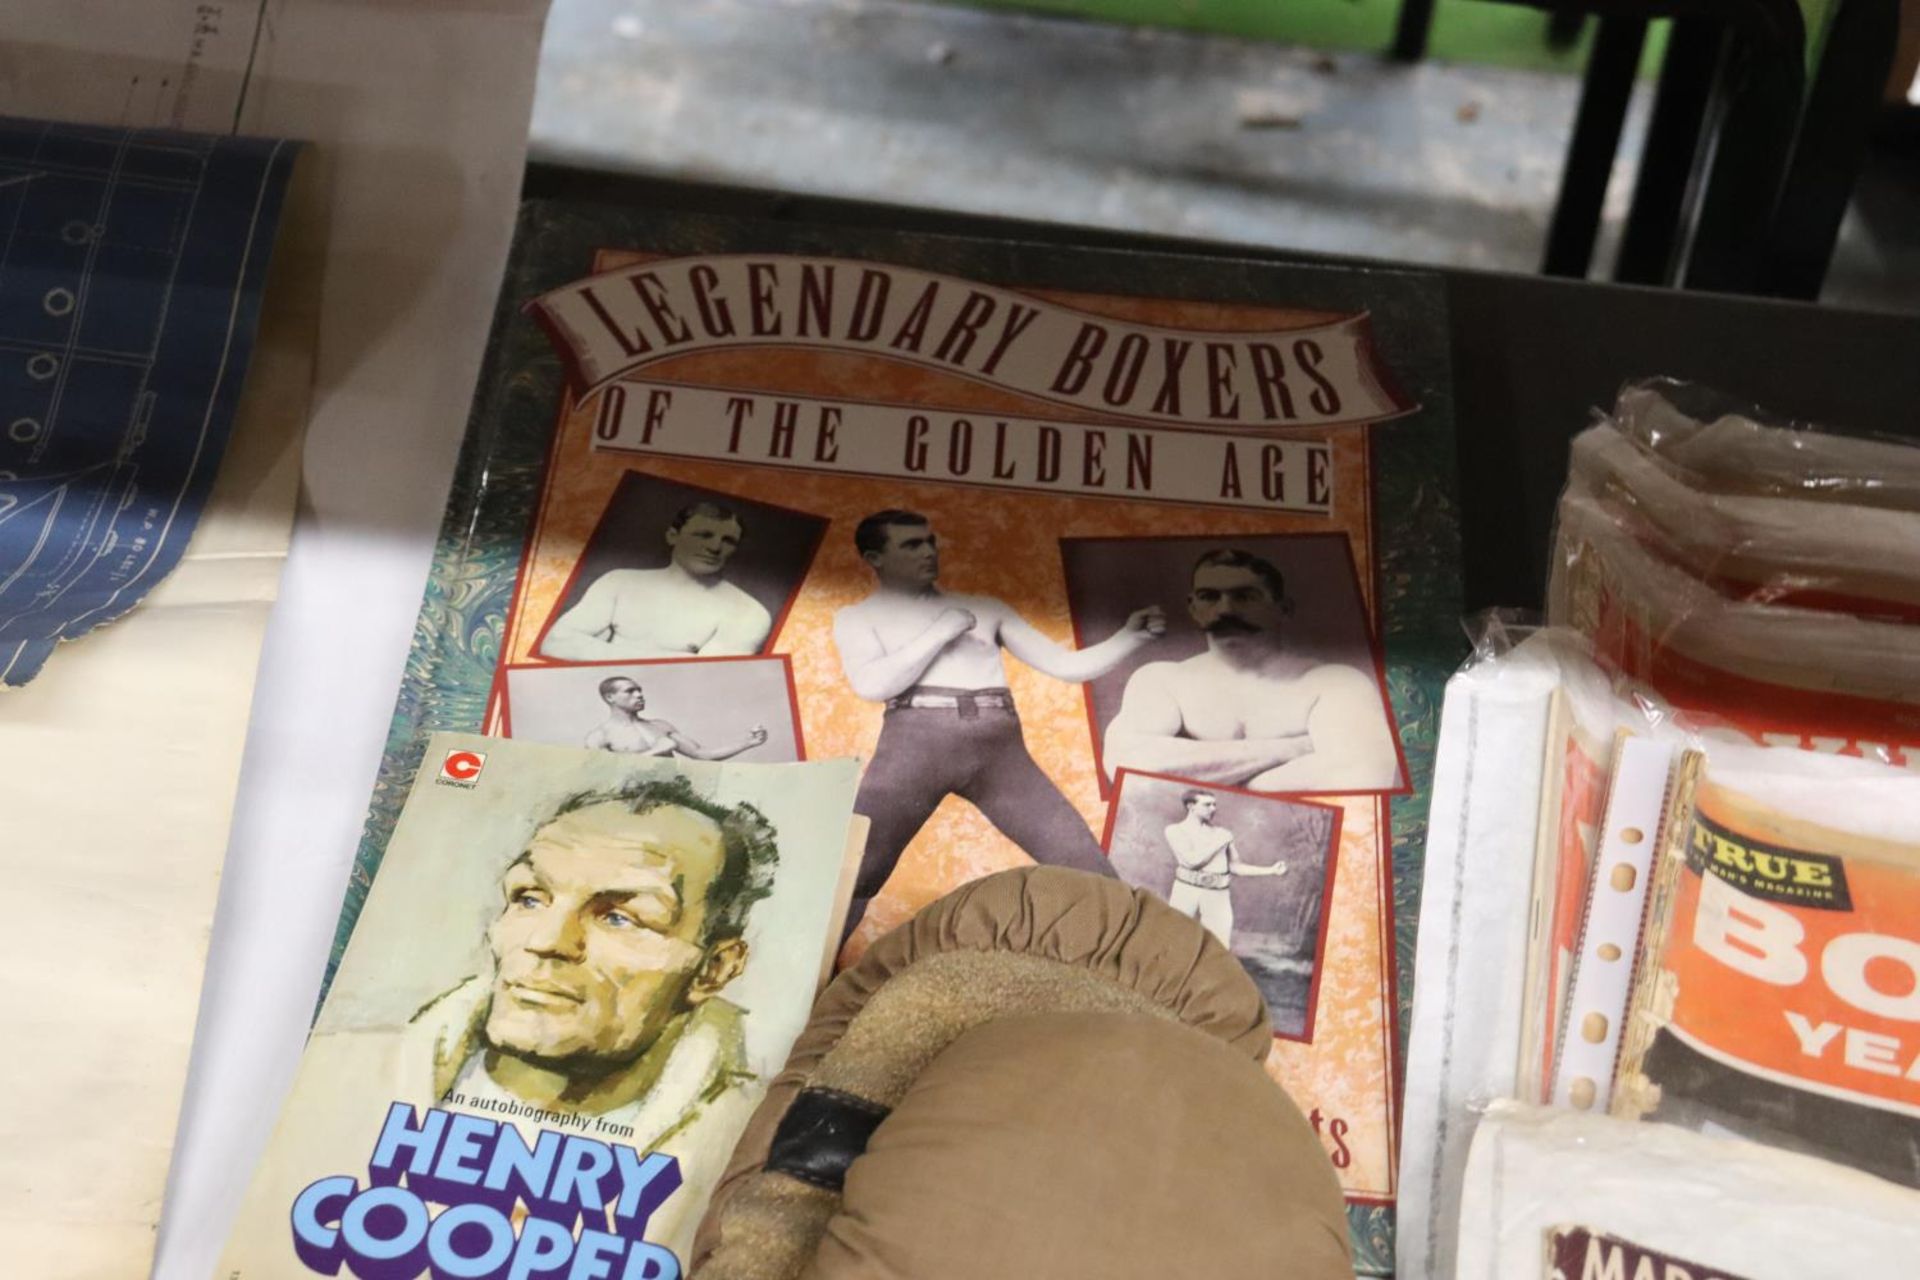 A COLLECTION OF VINTAGE BOXING ITEMS TO INCLUDE GLOVES, BOOK AND MAGAZINES - Image 4 of 7